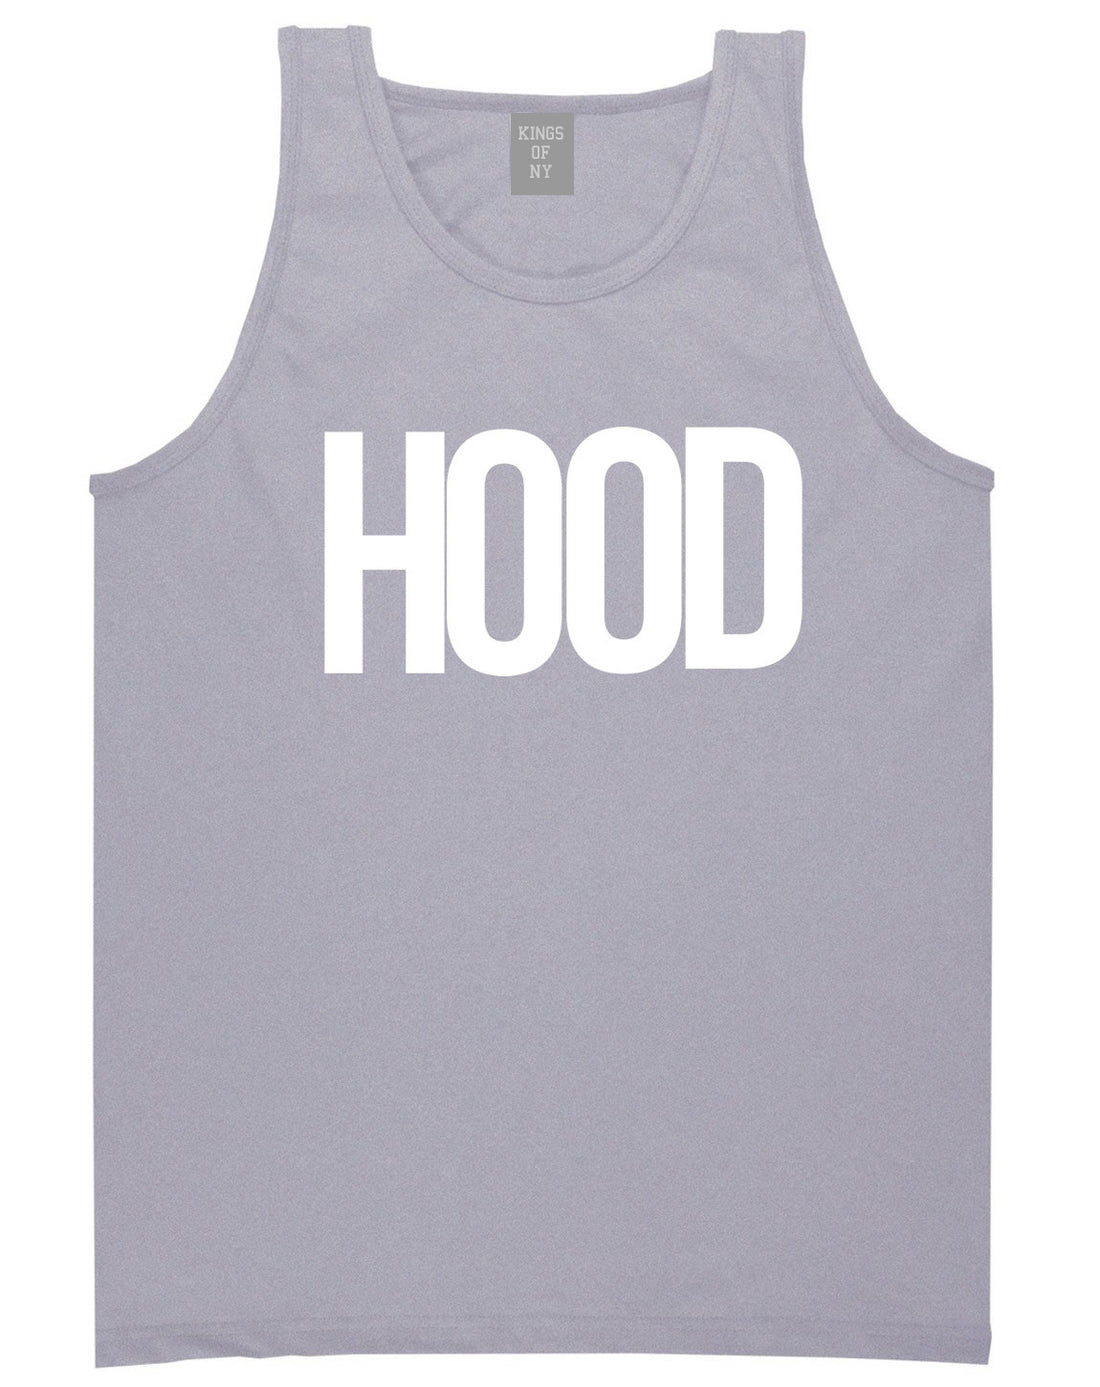 Hood Trap Style Compton New York Air Tank Top In Grey by Kings Of NY